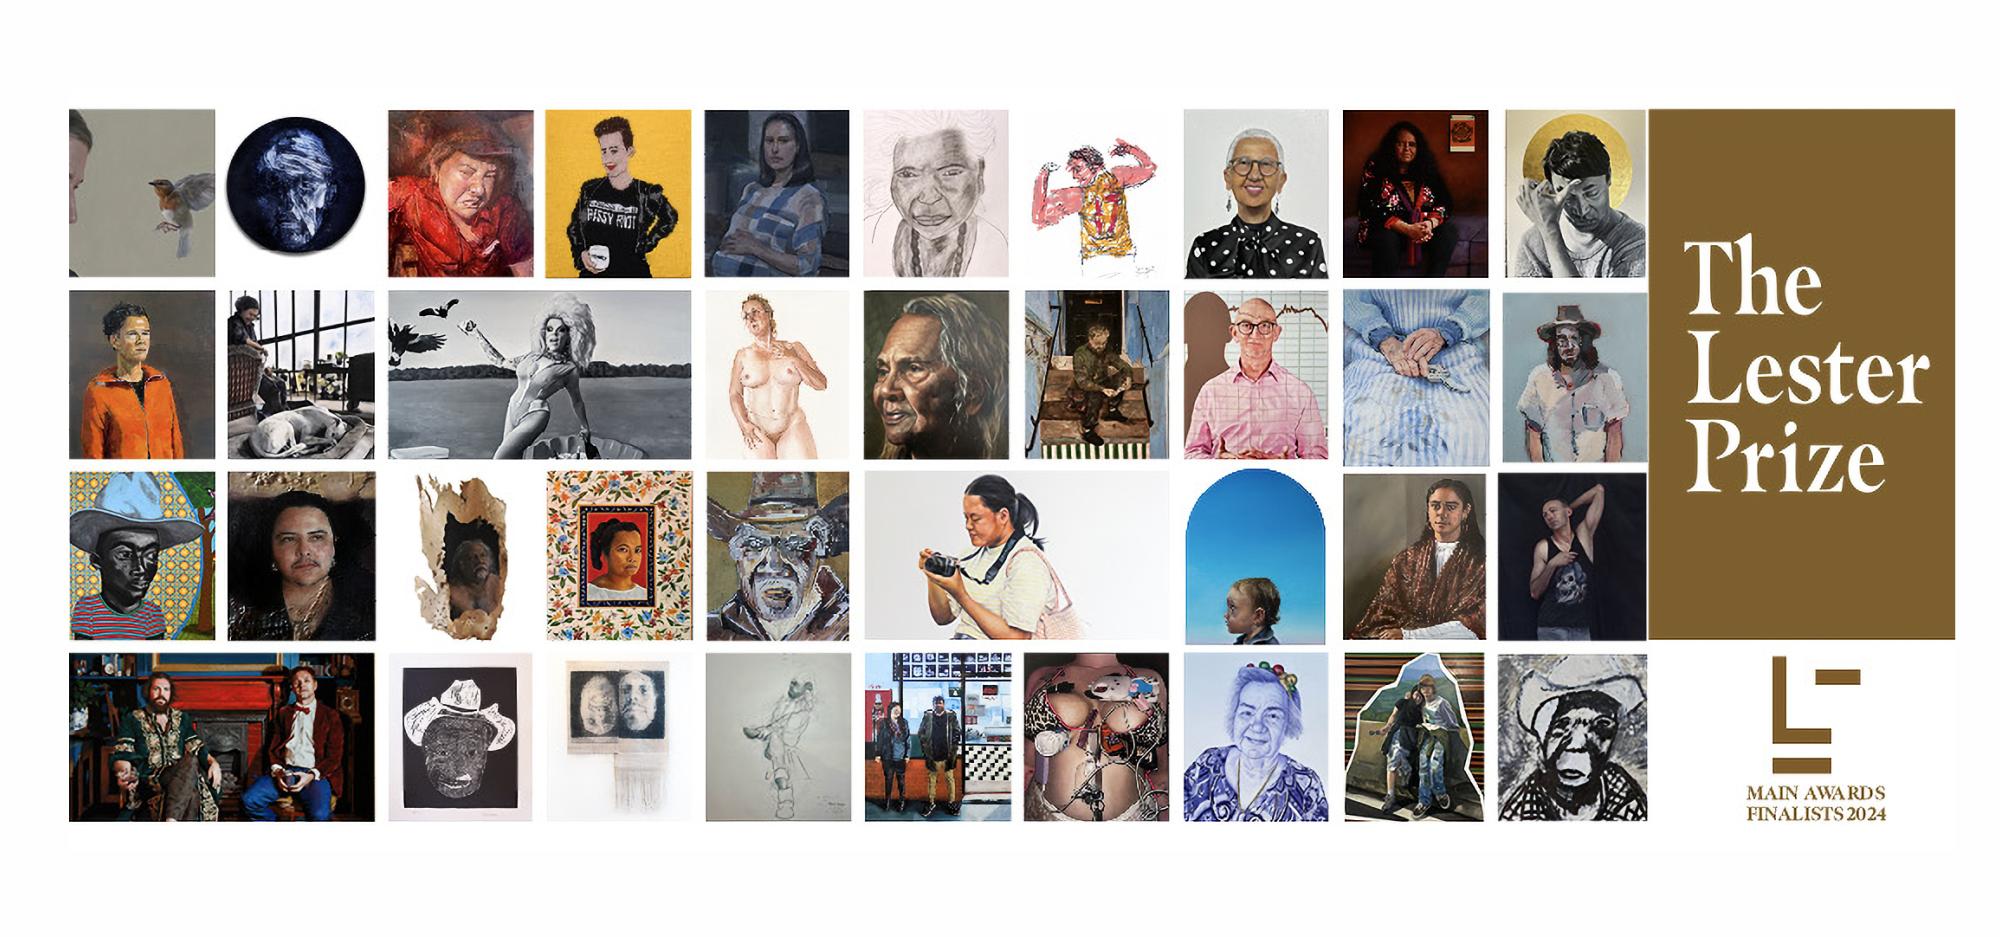 A mosaic of artistic portraits of people in various colours and styles in a grid formation. A gold banner on the right contains the words The Lester Prize Main Awards Finalists 2024